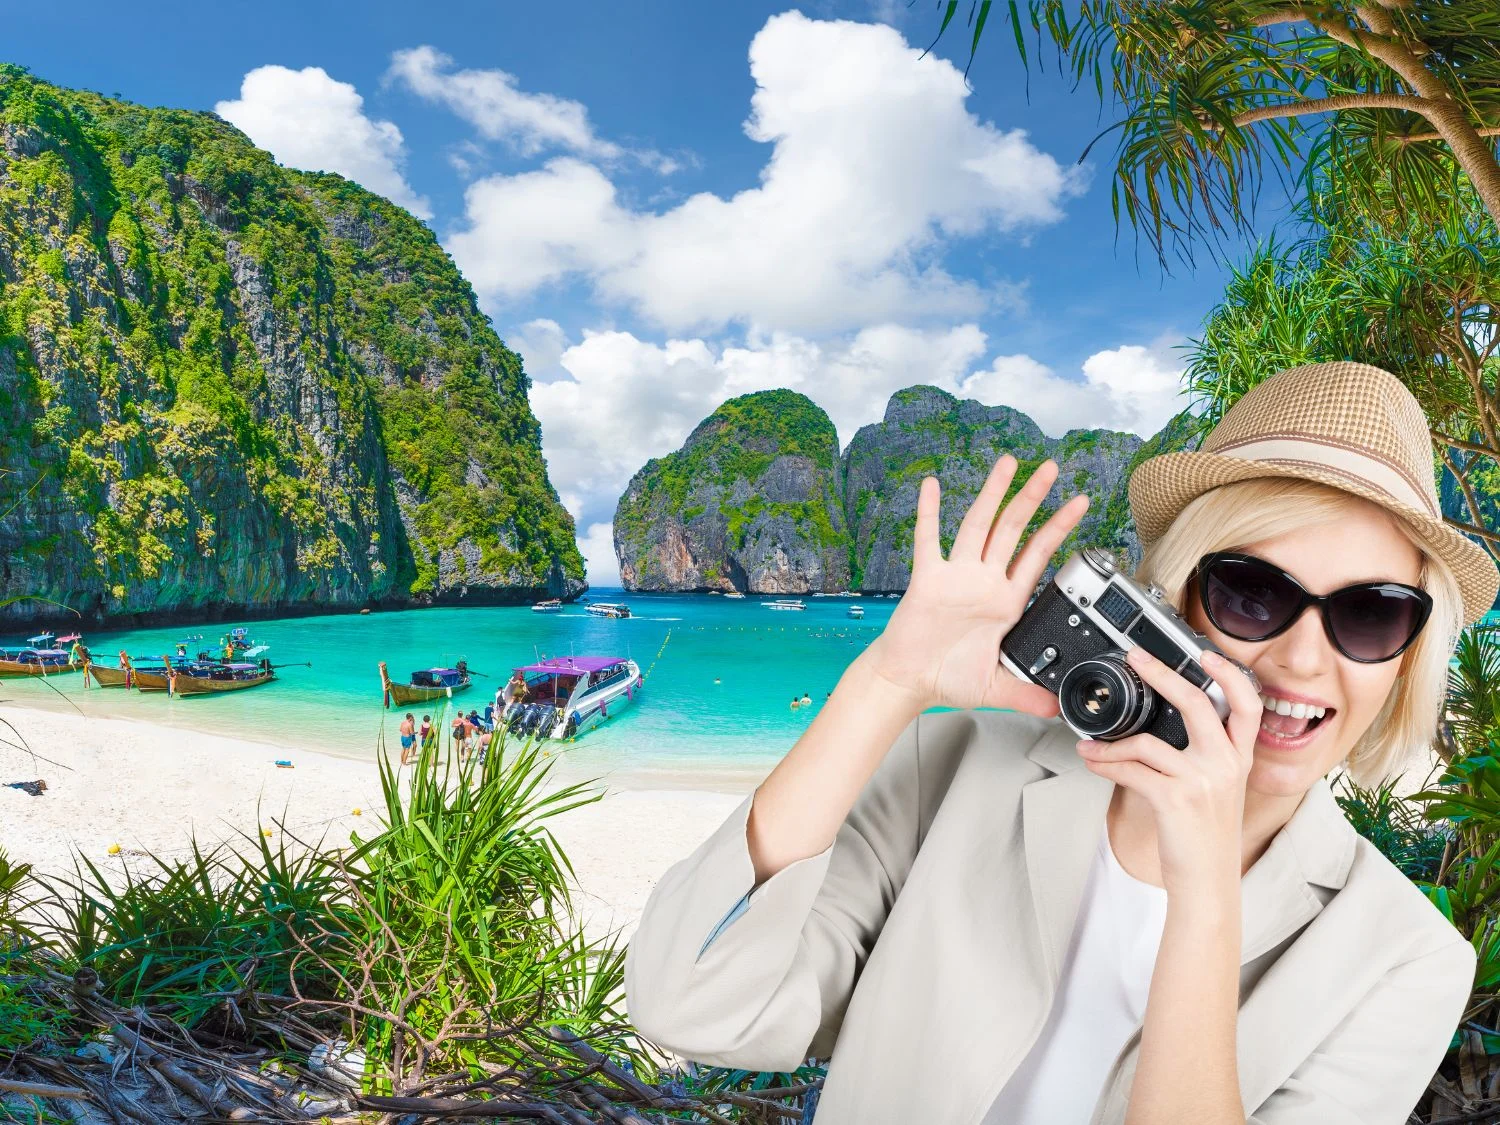 The 10 Best Thailand Tours For Unforgettable Adventures That Are Achievable & Affordable!